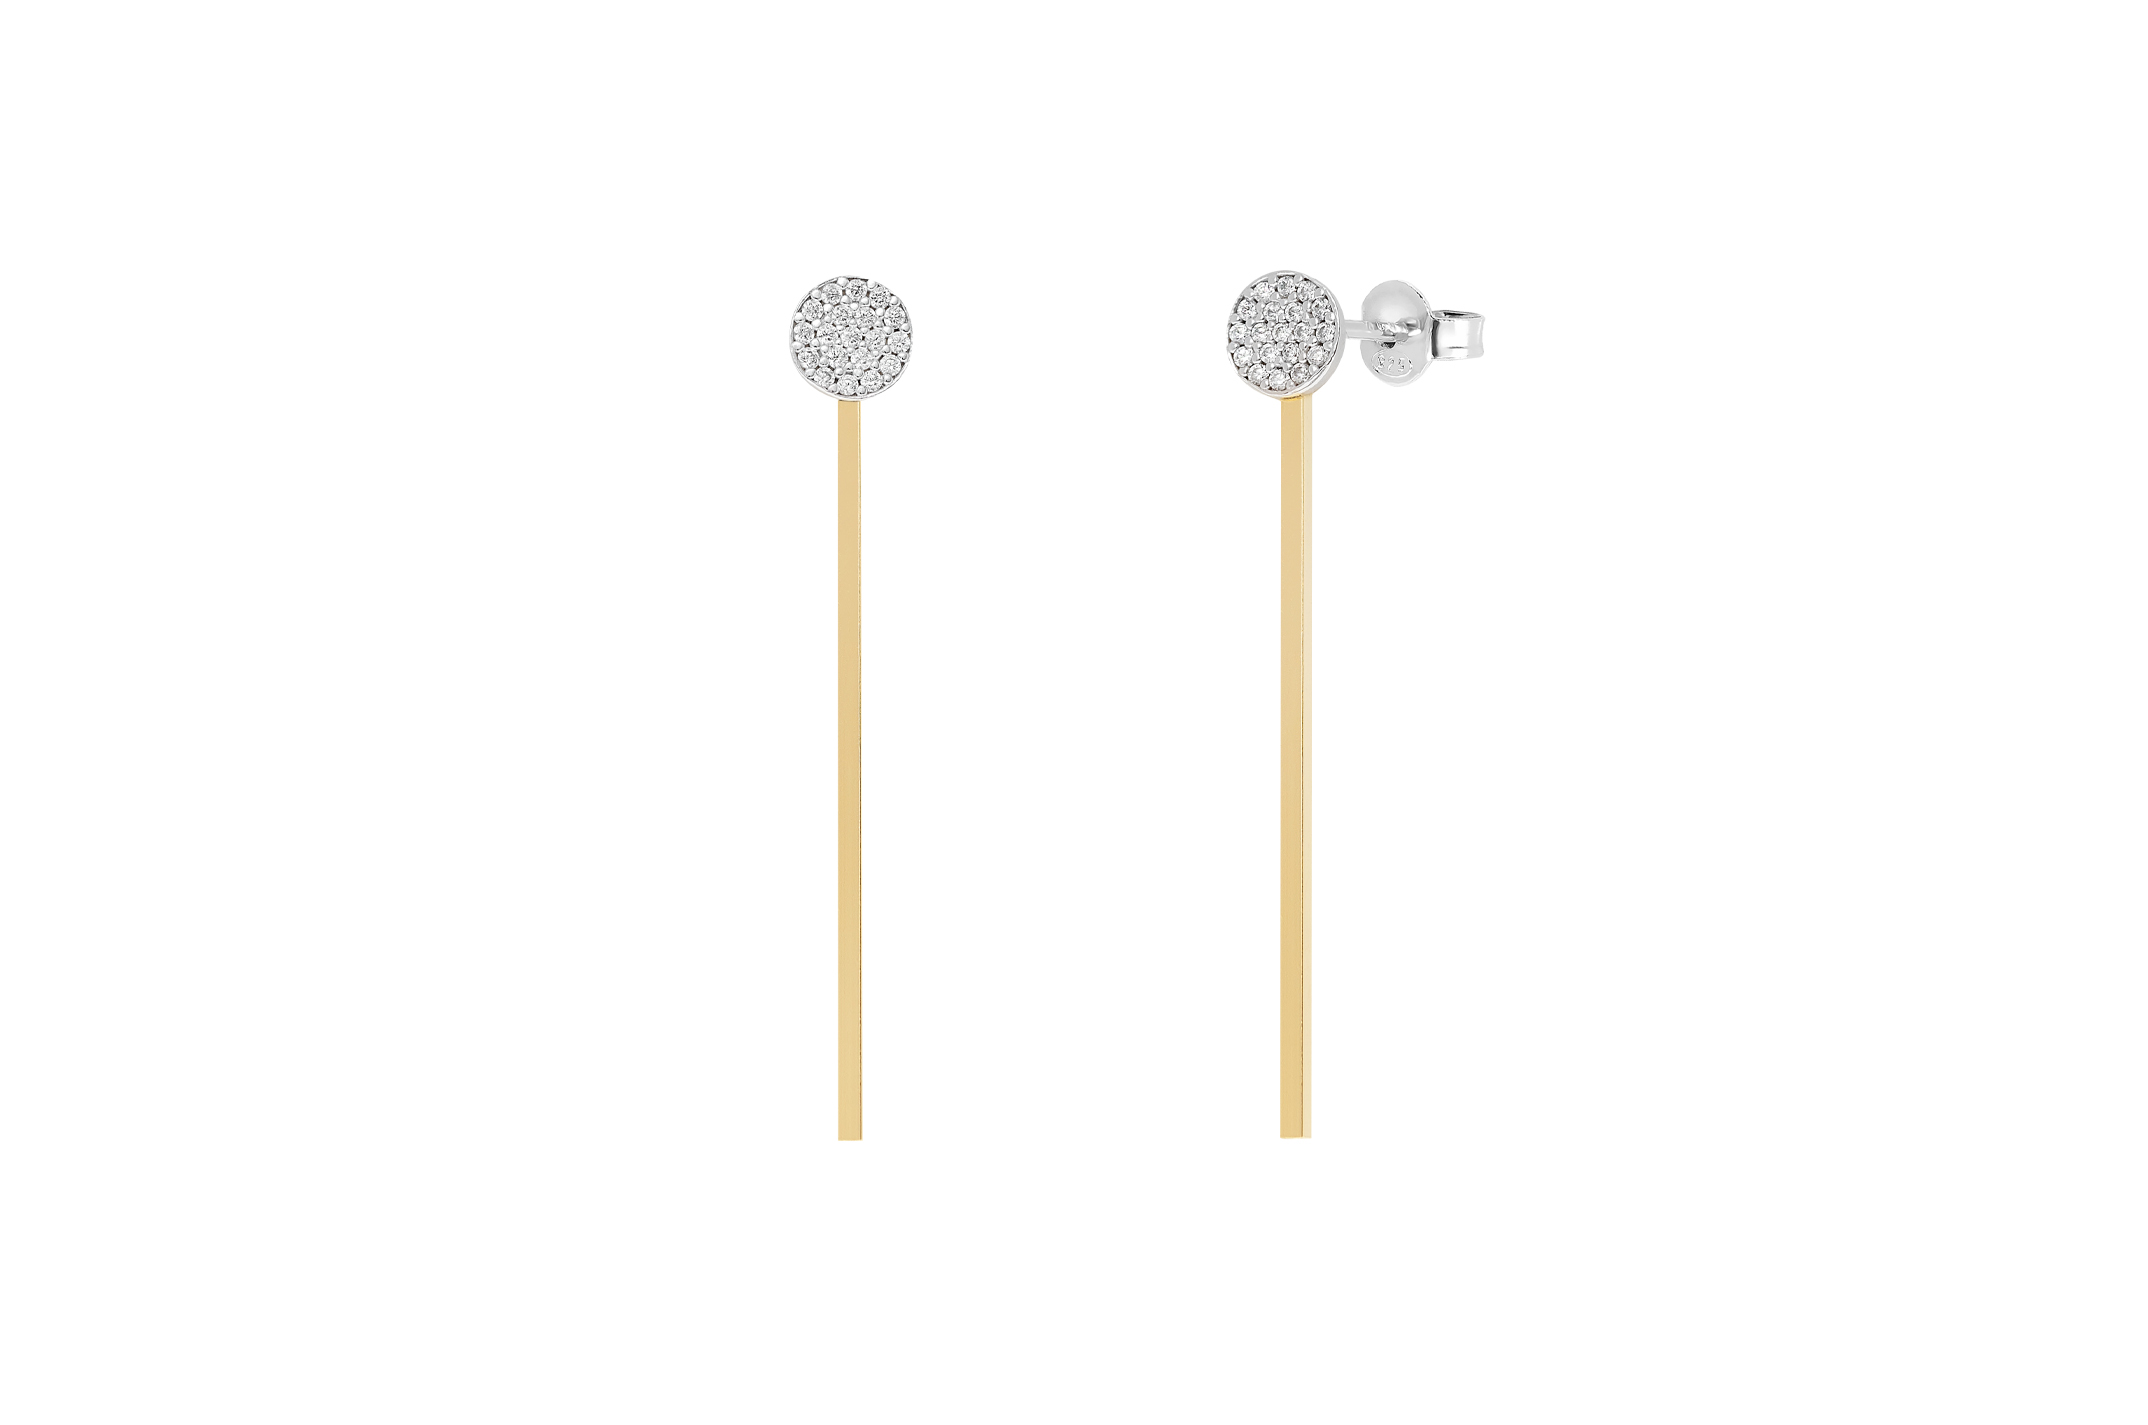 Jewel: earrings;Material: silver 925;Weight: 3.3 gr;Stone: zirconia;Color: bicolor;Size: 4 cm & 0.5 cm